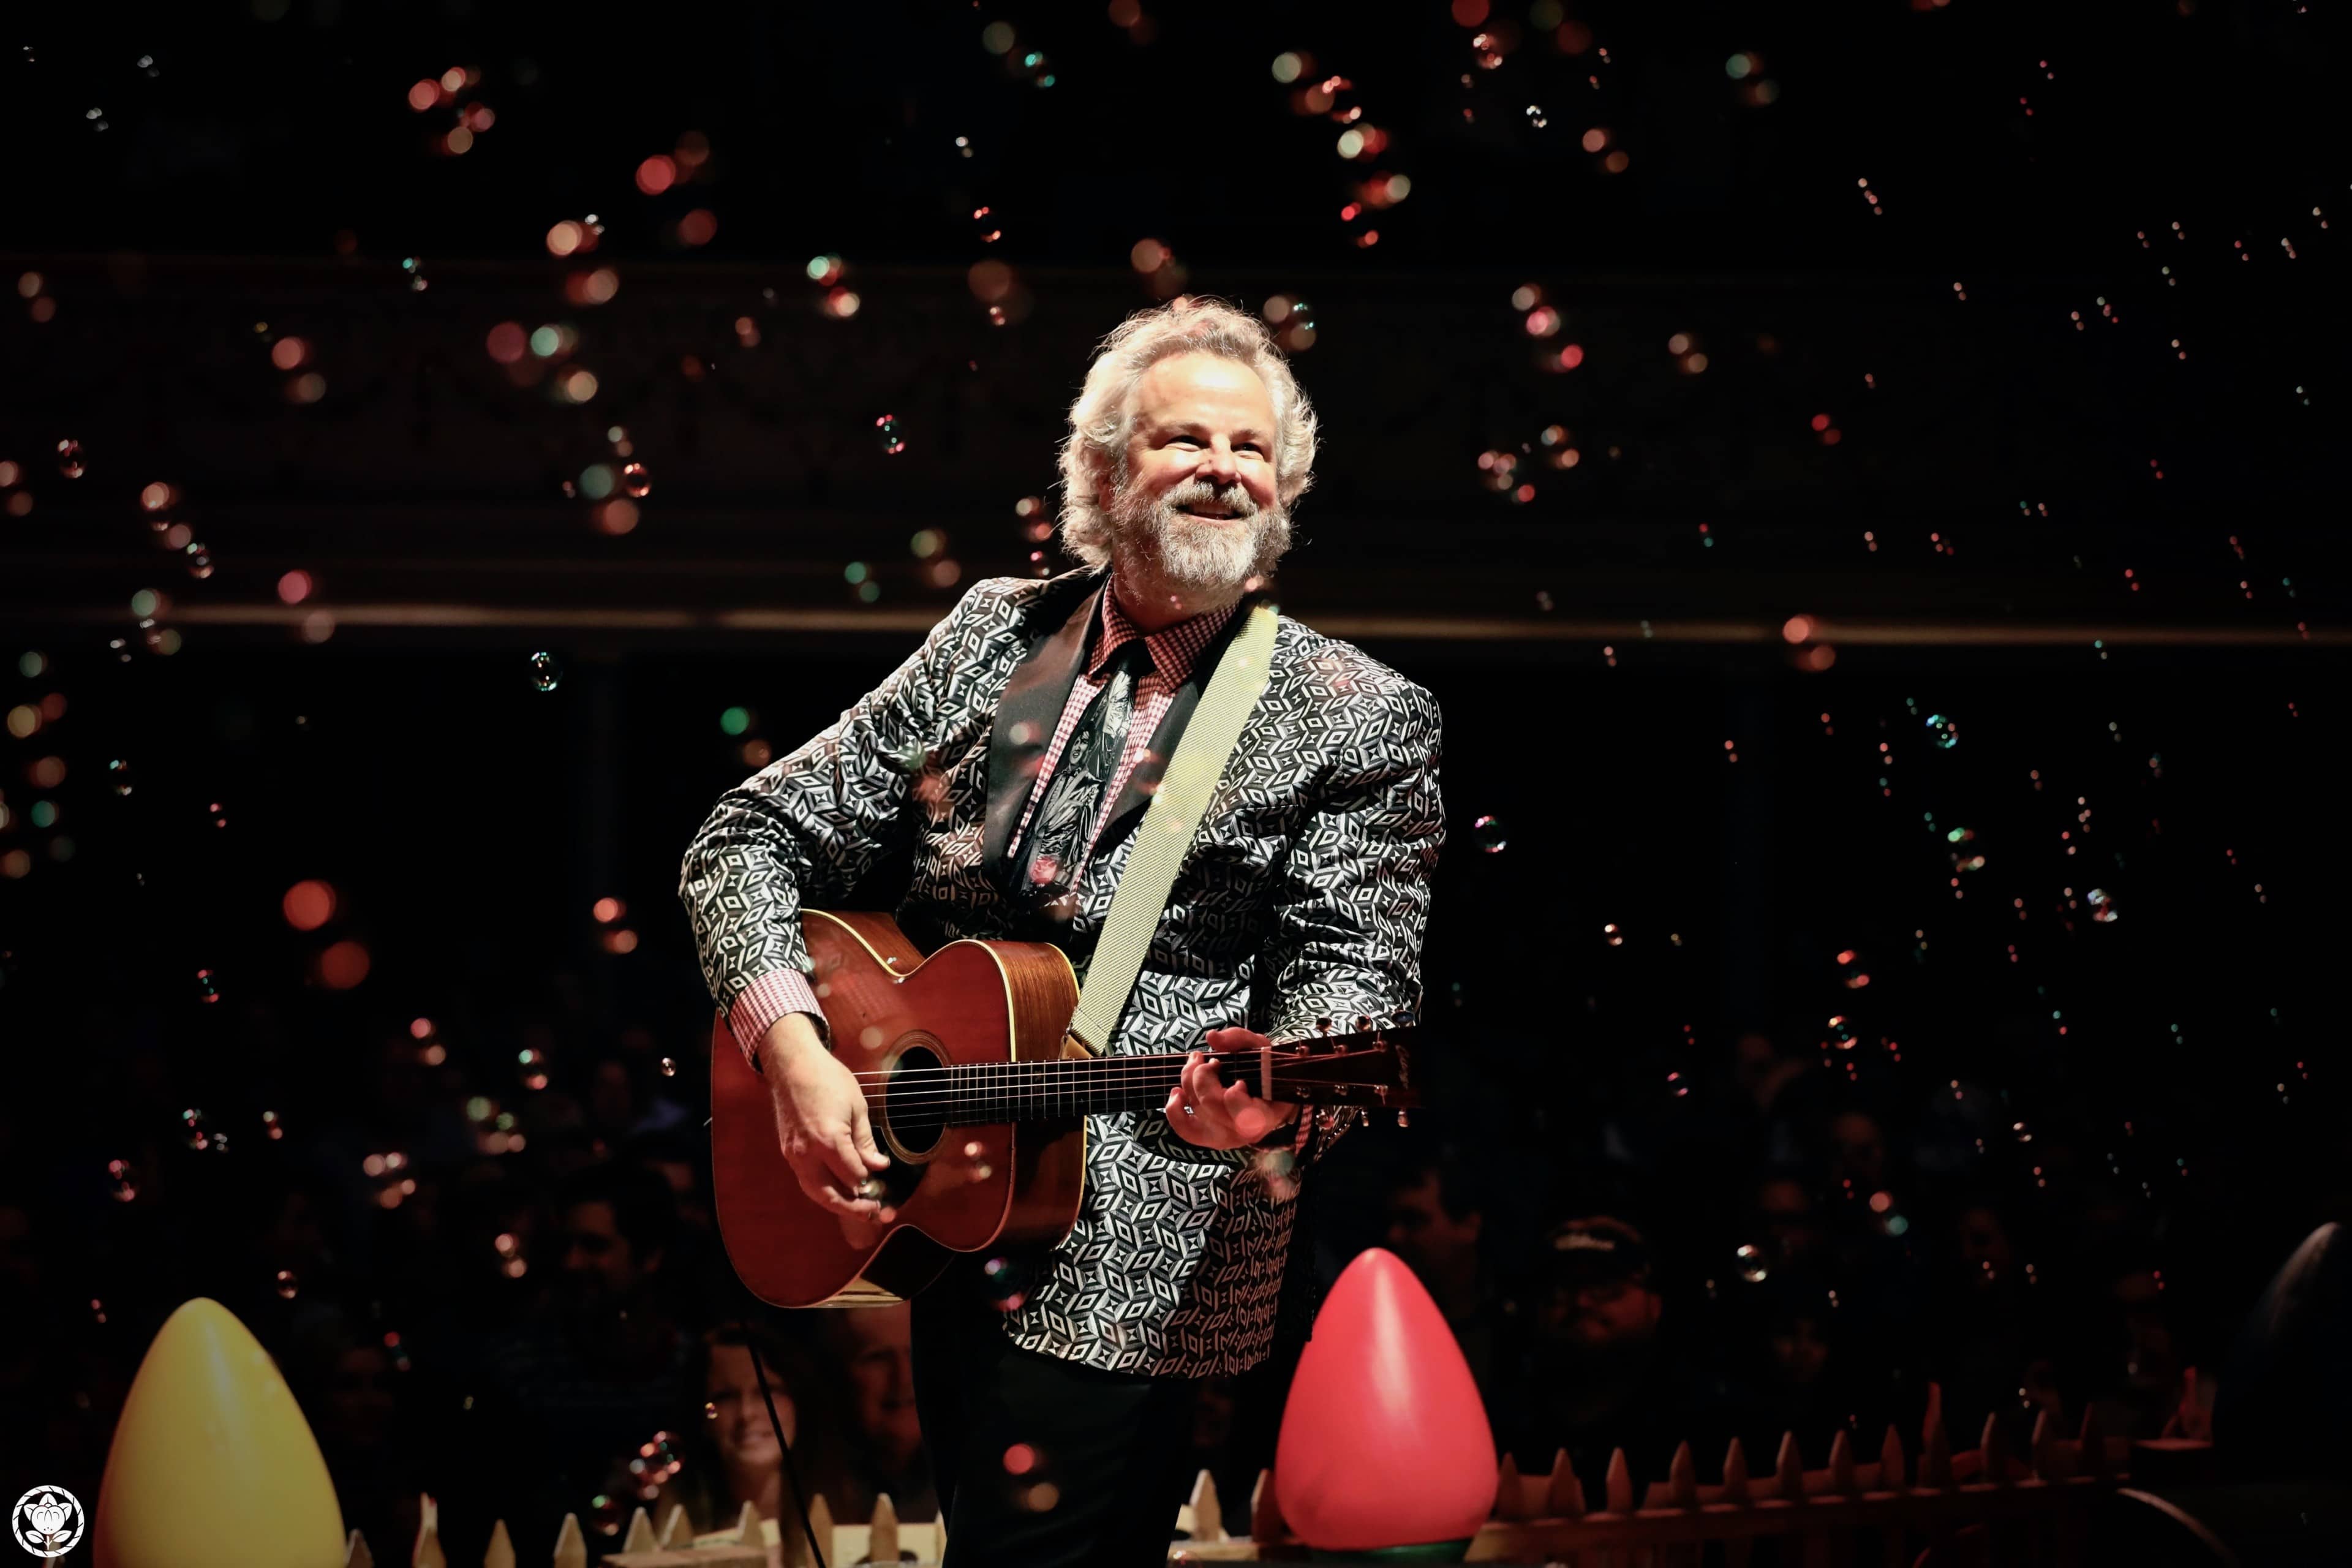 Robert Earl Keen Celebrates Christmas to the Moon and Back Announces his Biggest Holiday Tour Yet